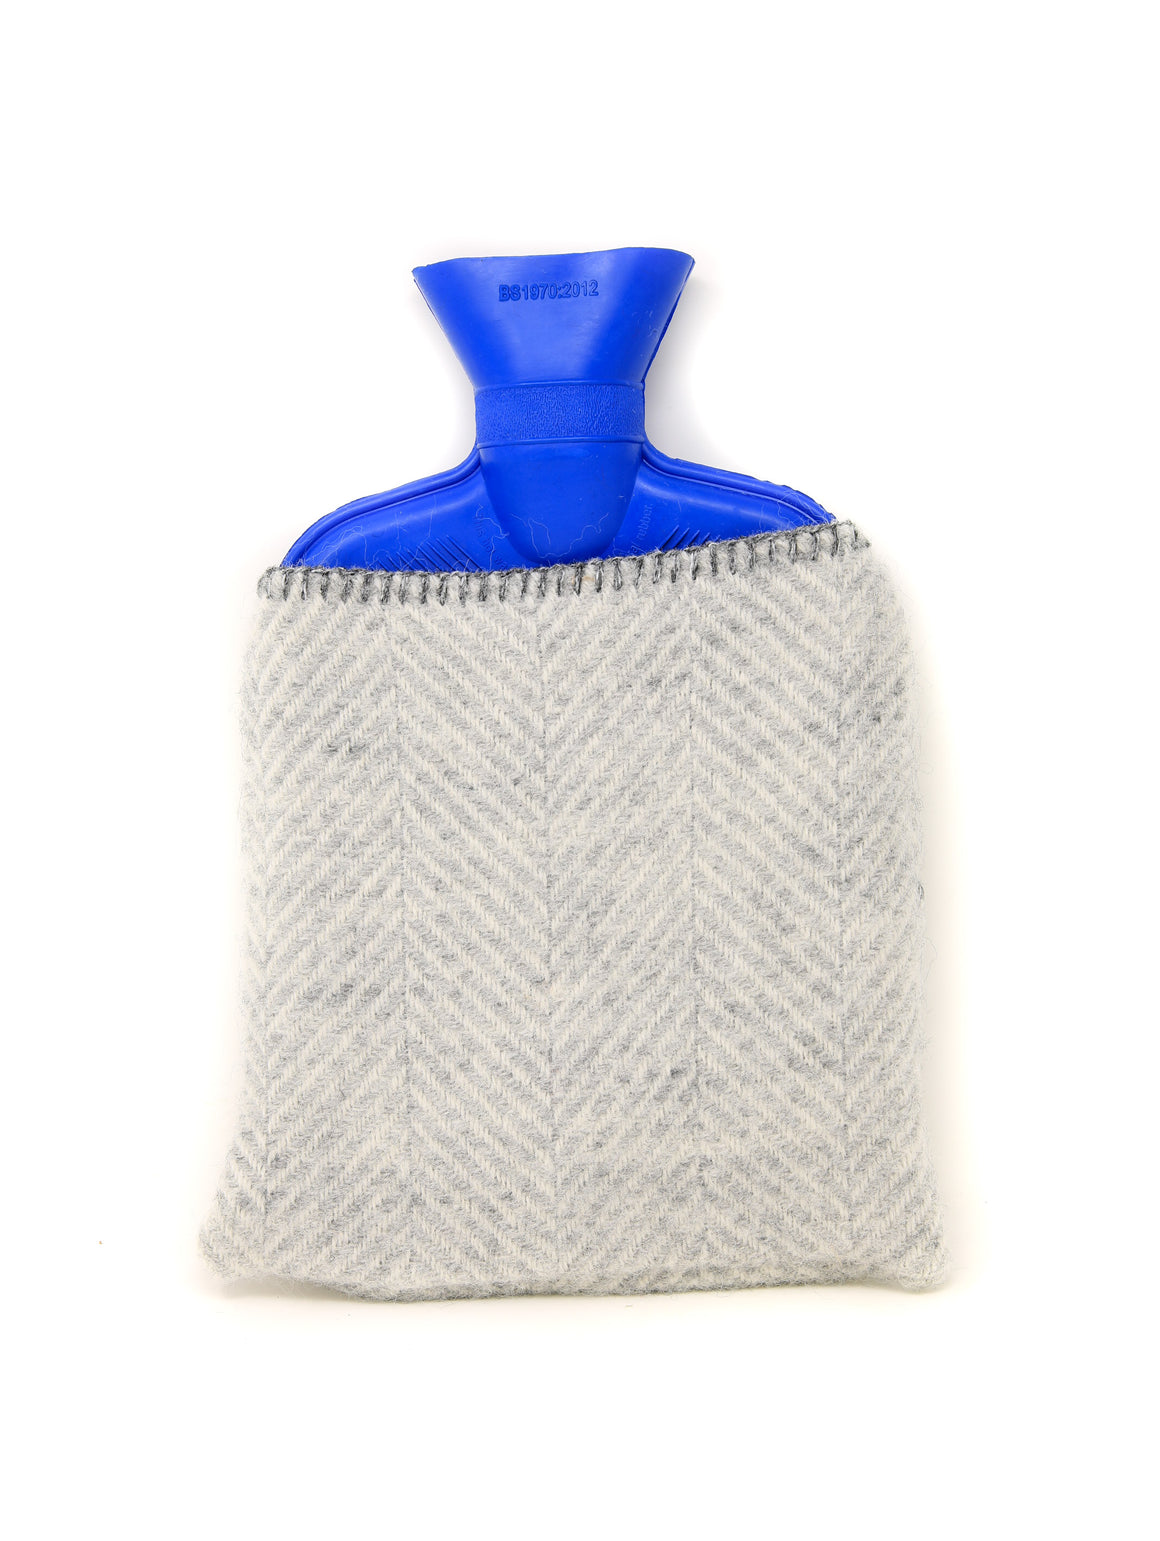 Addison Hot Water Bottle with Herringbone Grey Wool Cover